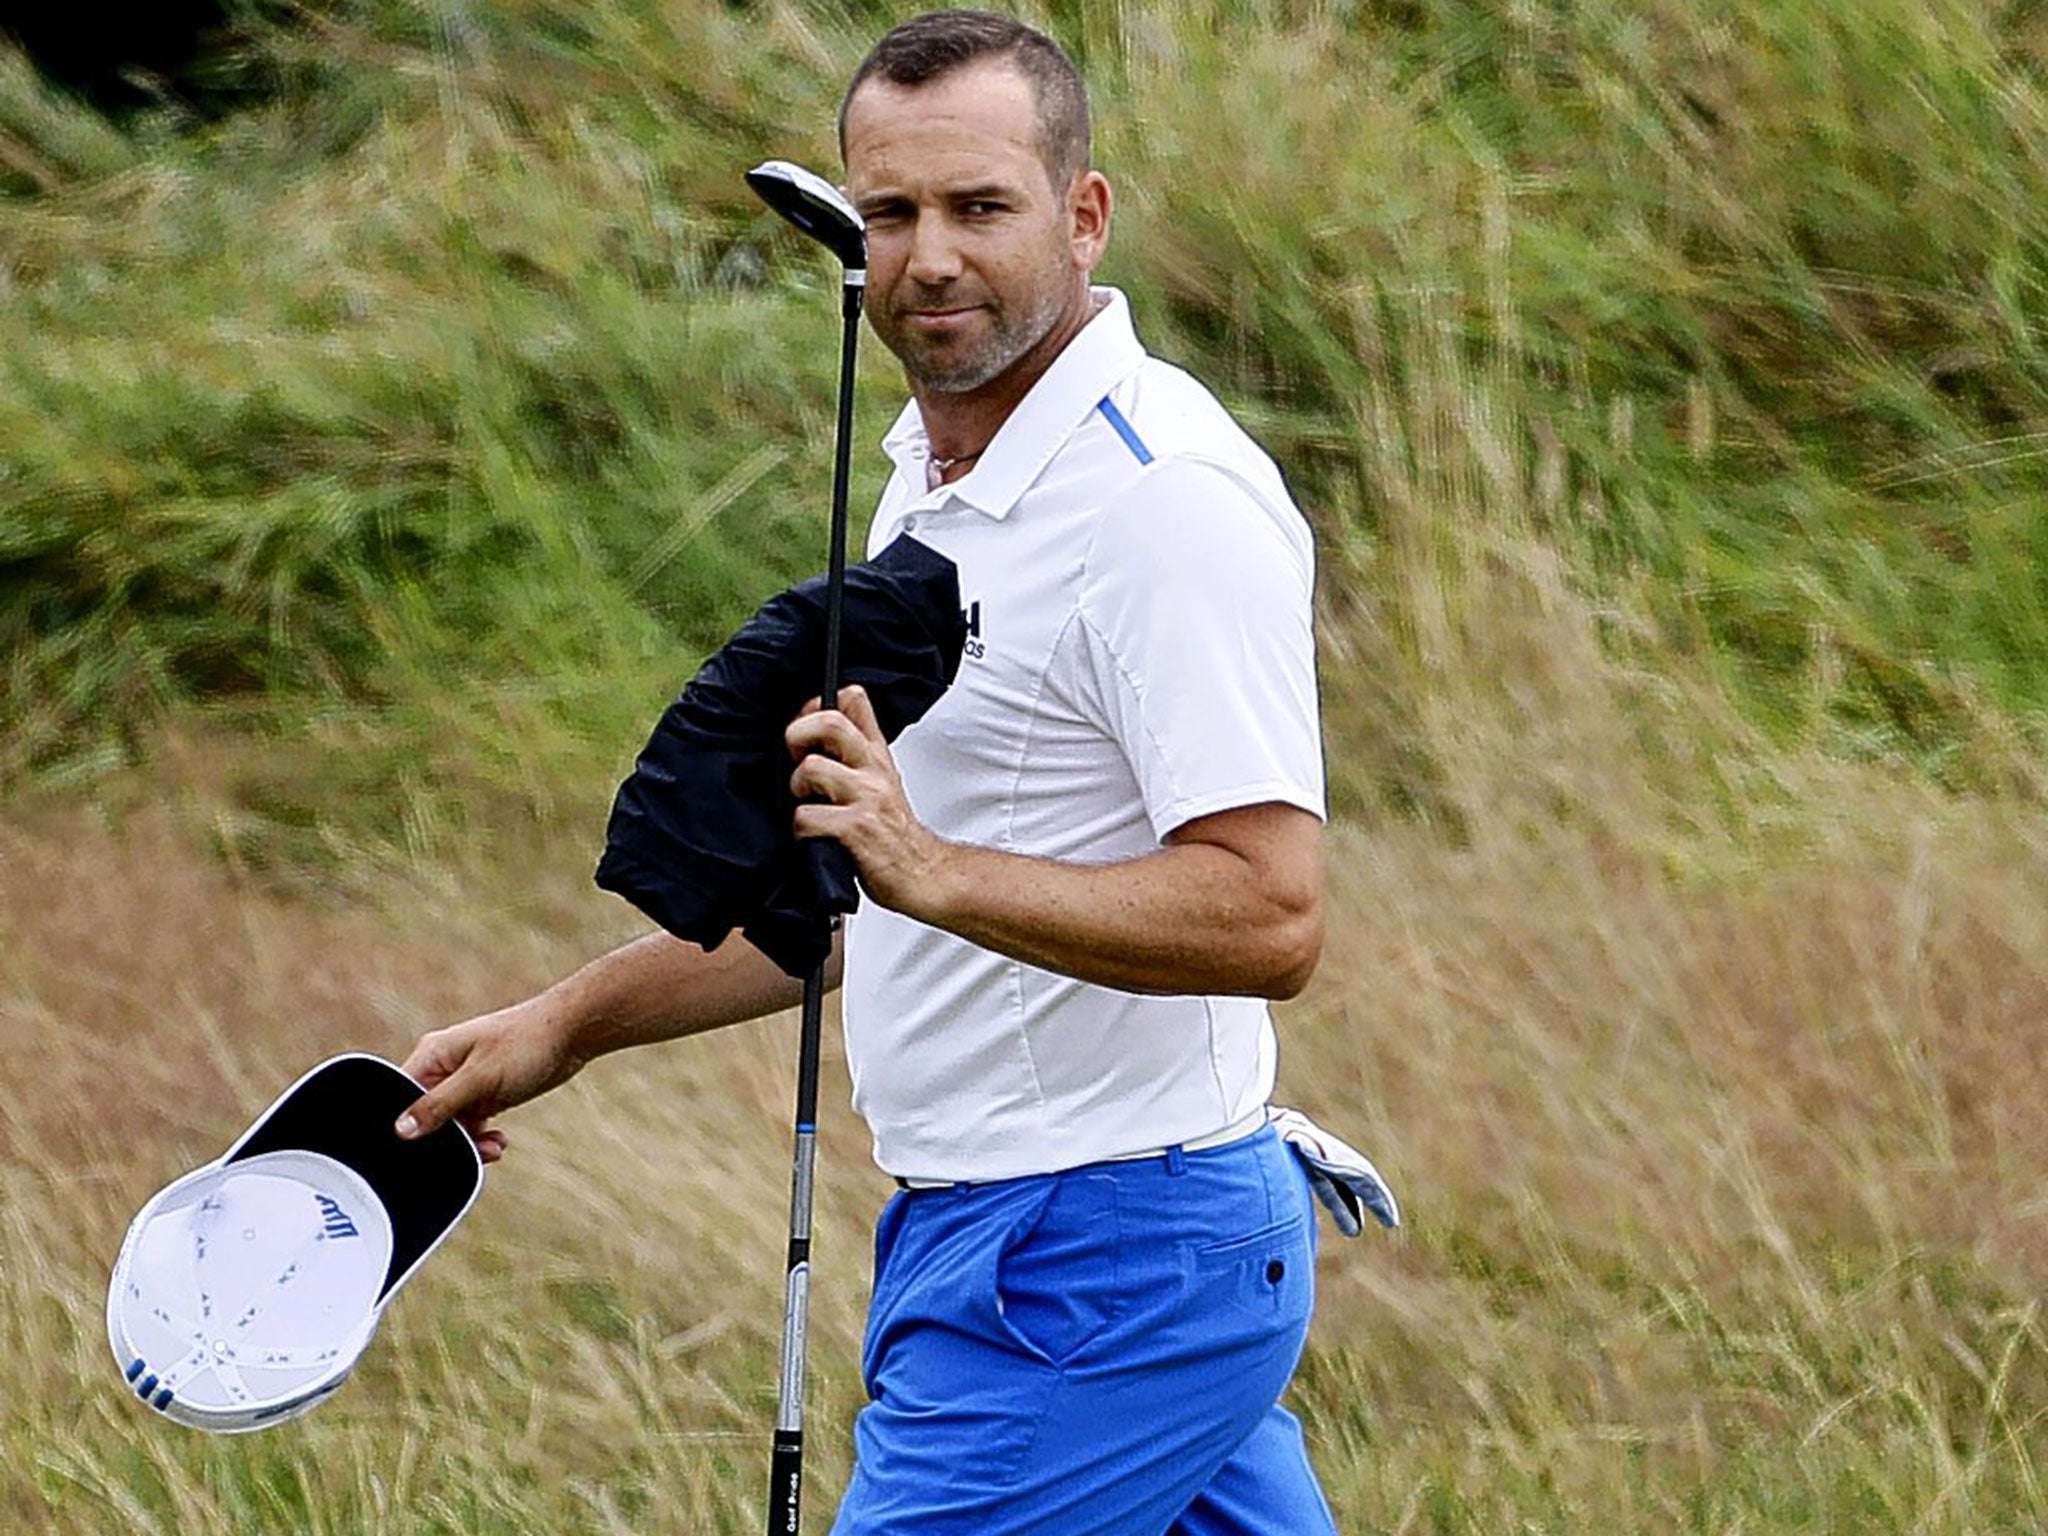 Fans’ favourite Sergio Garcia has long since won the hearts of spectators but there no prizes for popularity